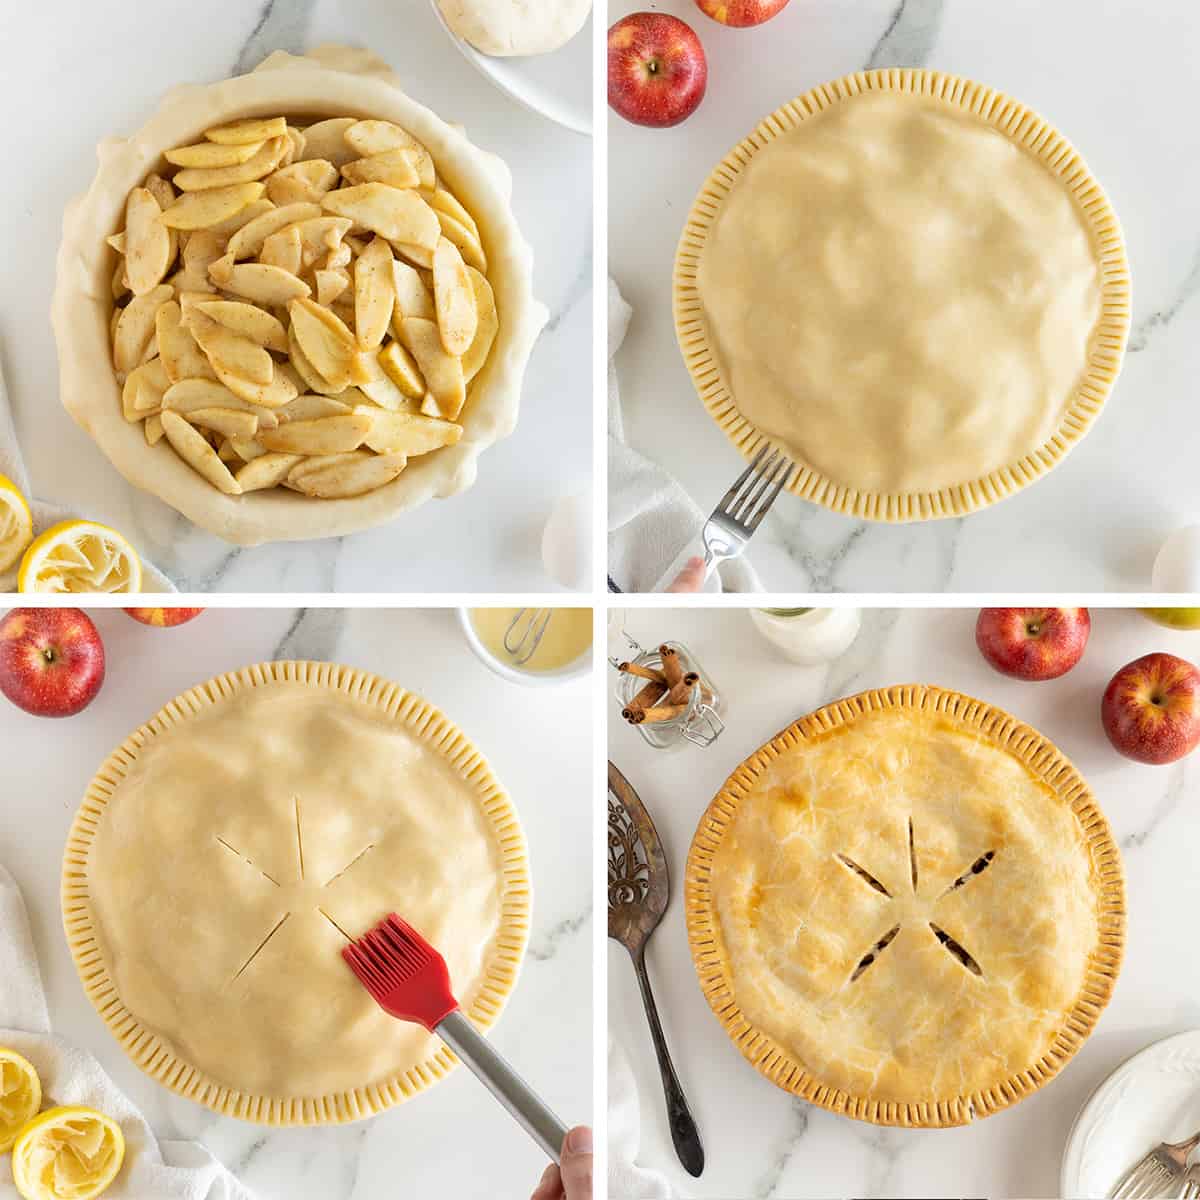 Four images of apple pie filling in a pie crust and then topped with a top crust.